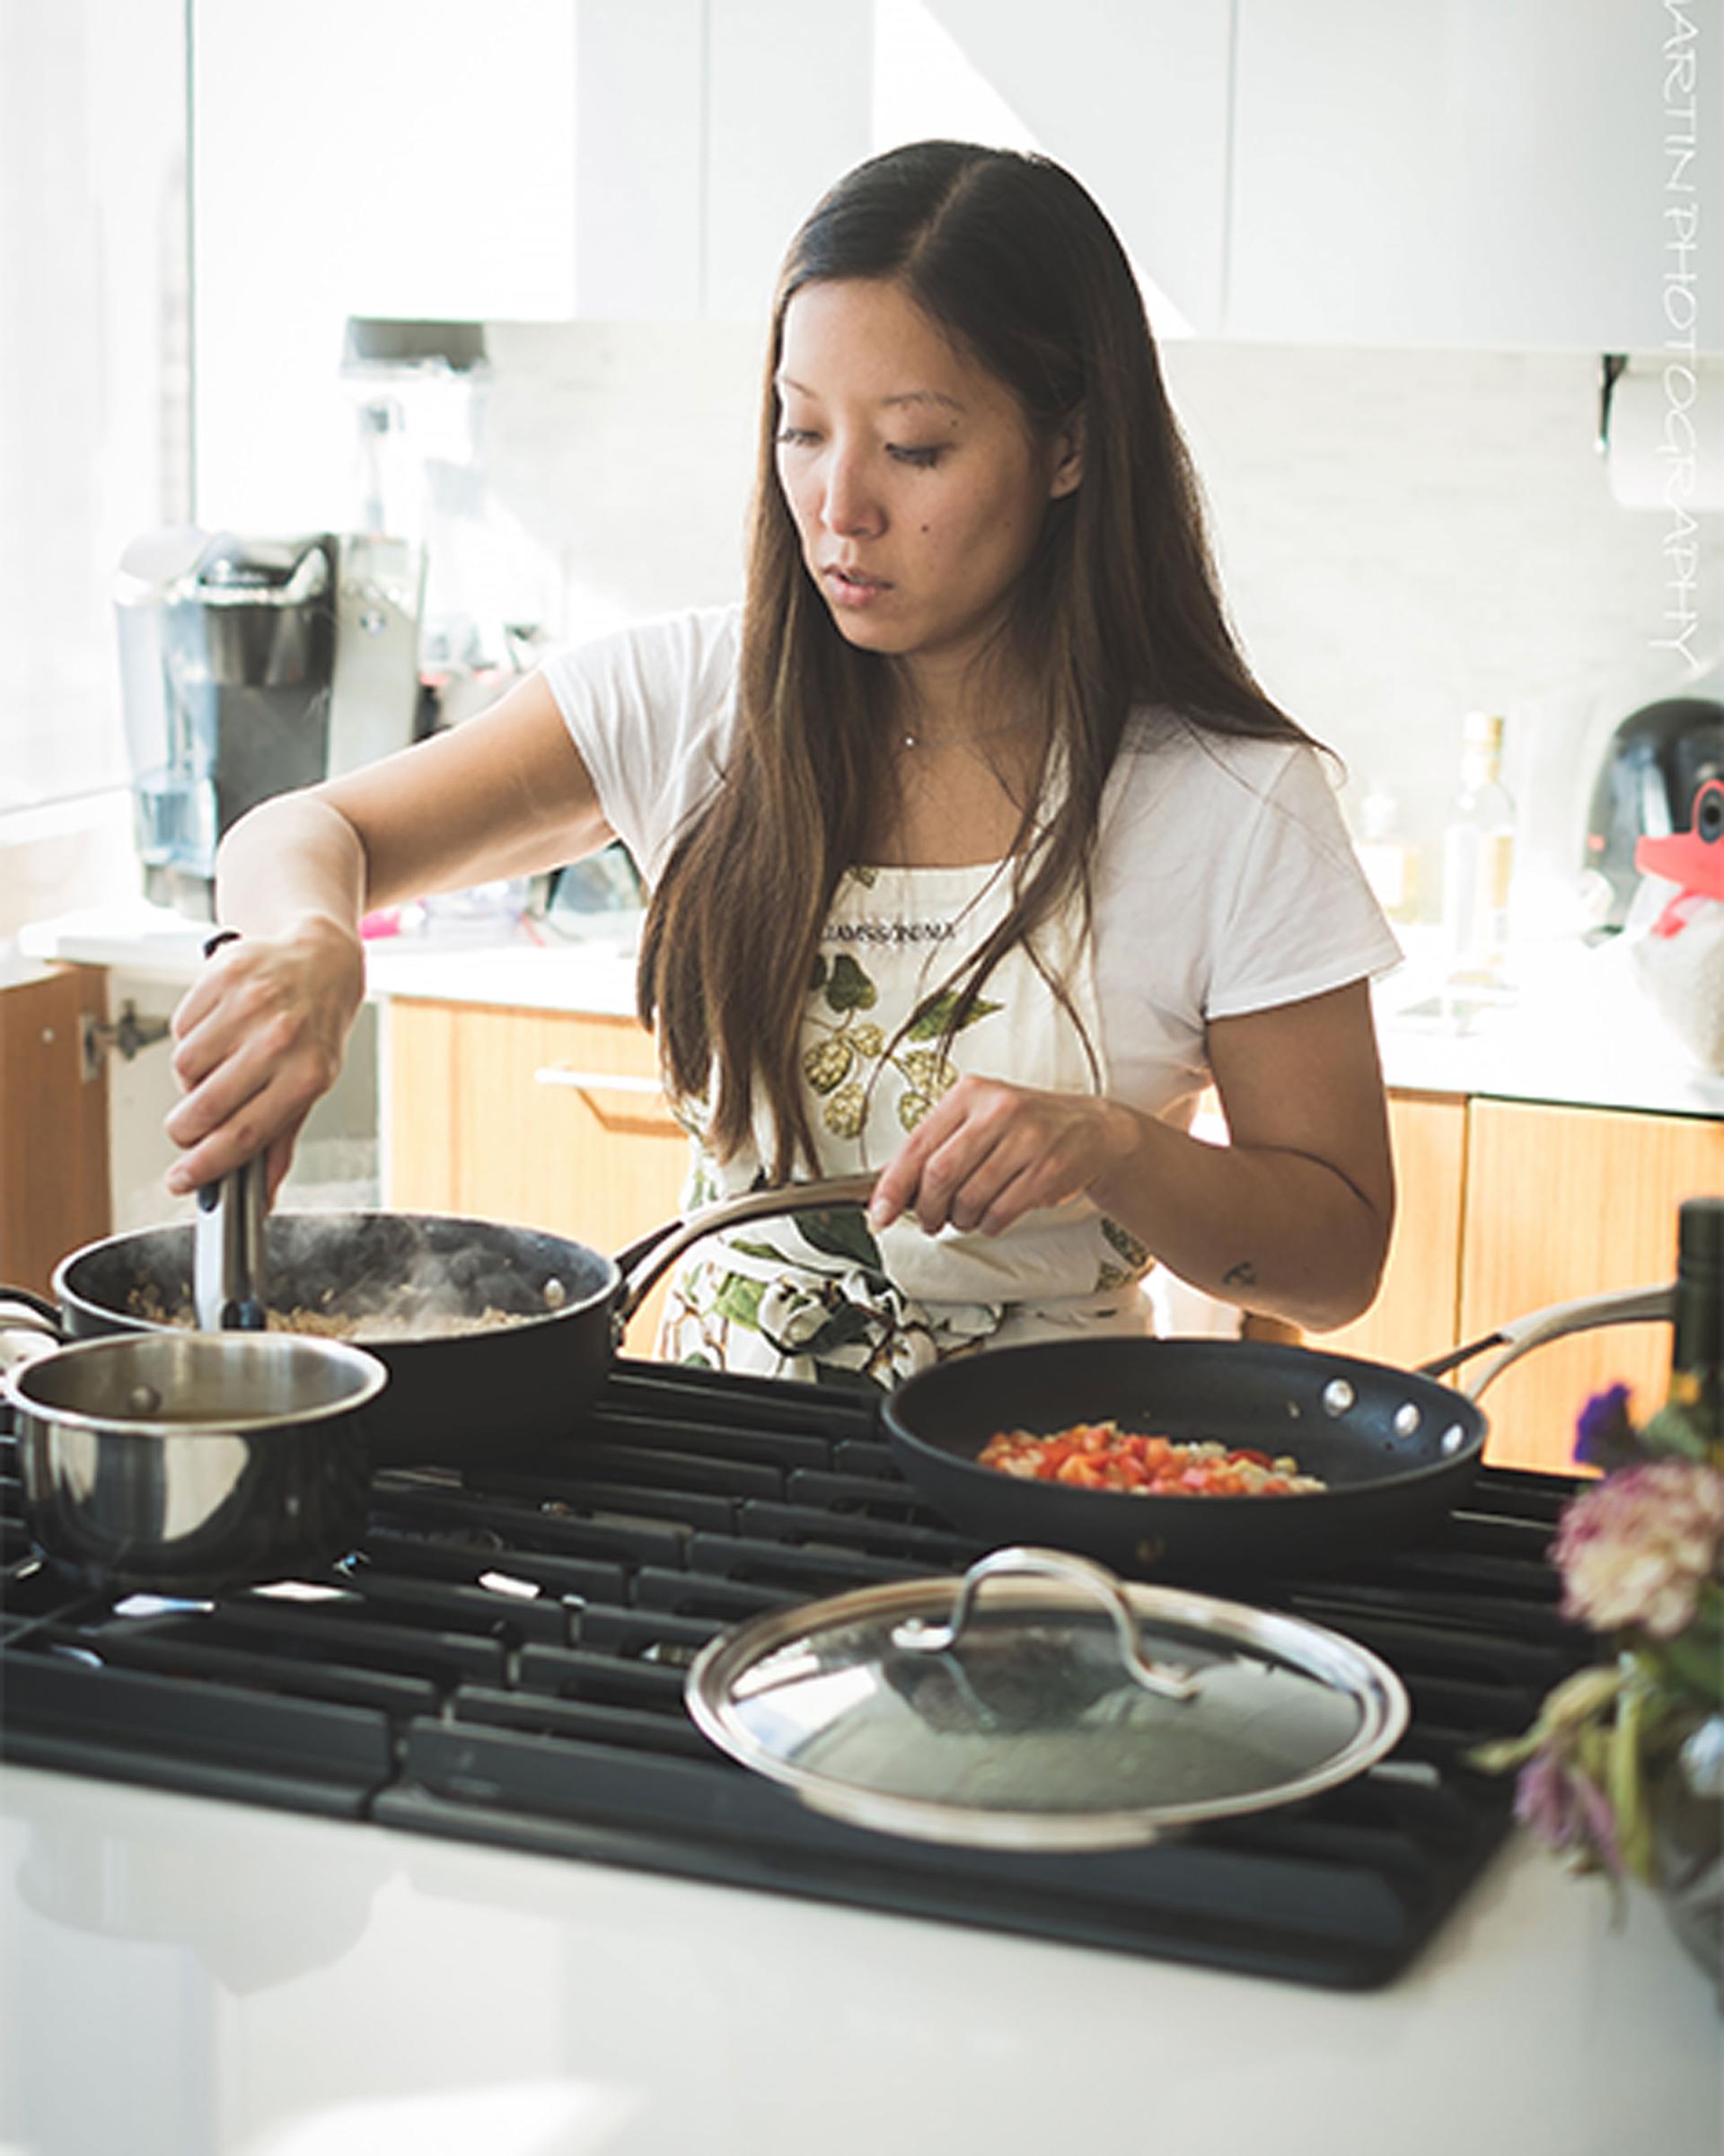 Food blogger Joanne Lee Molinaro, known as the Korean Vegan, cooks in her kitchen.